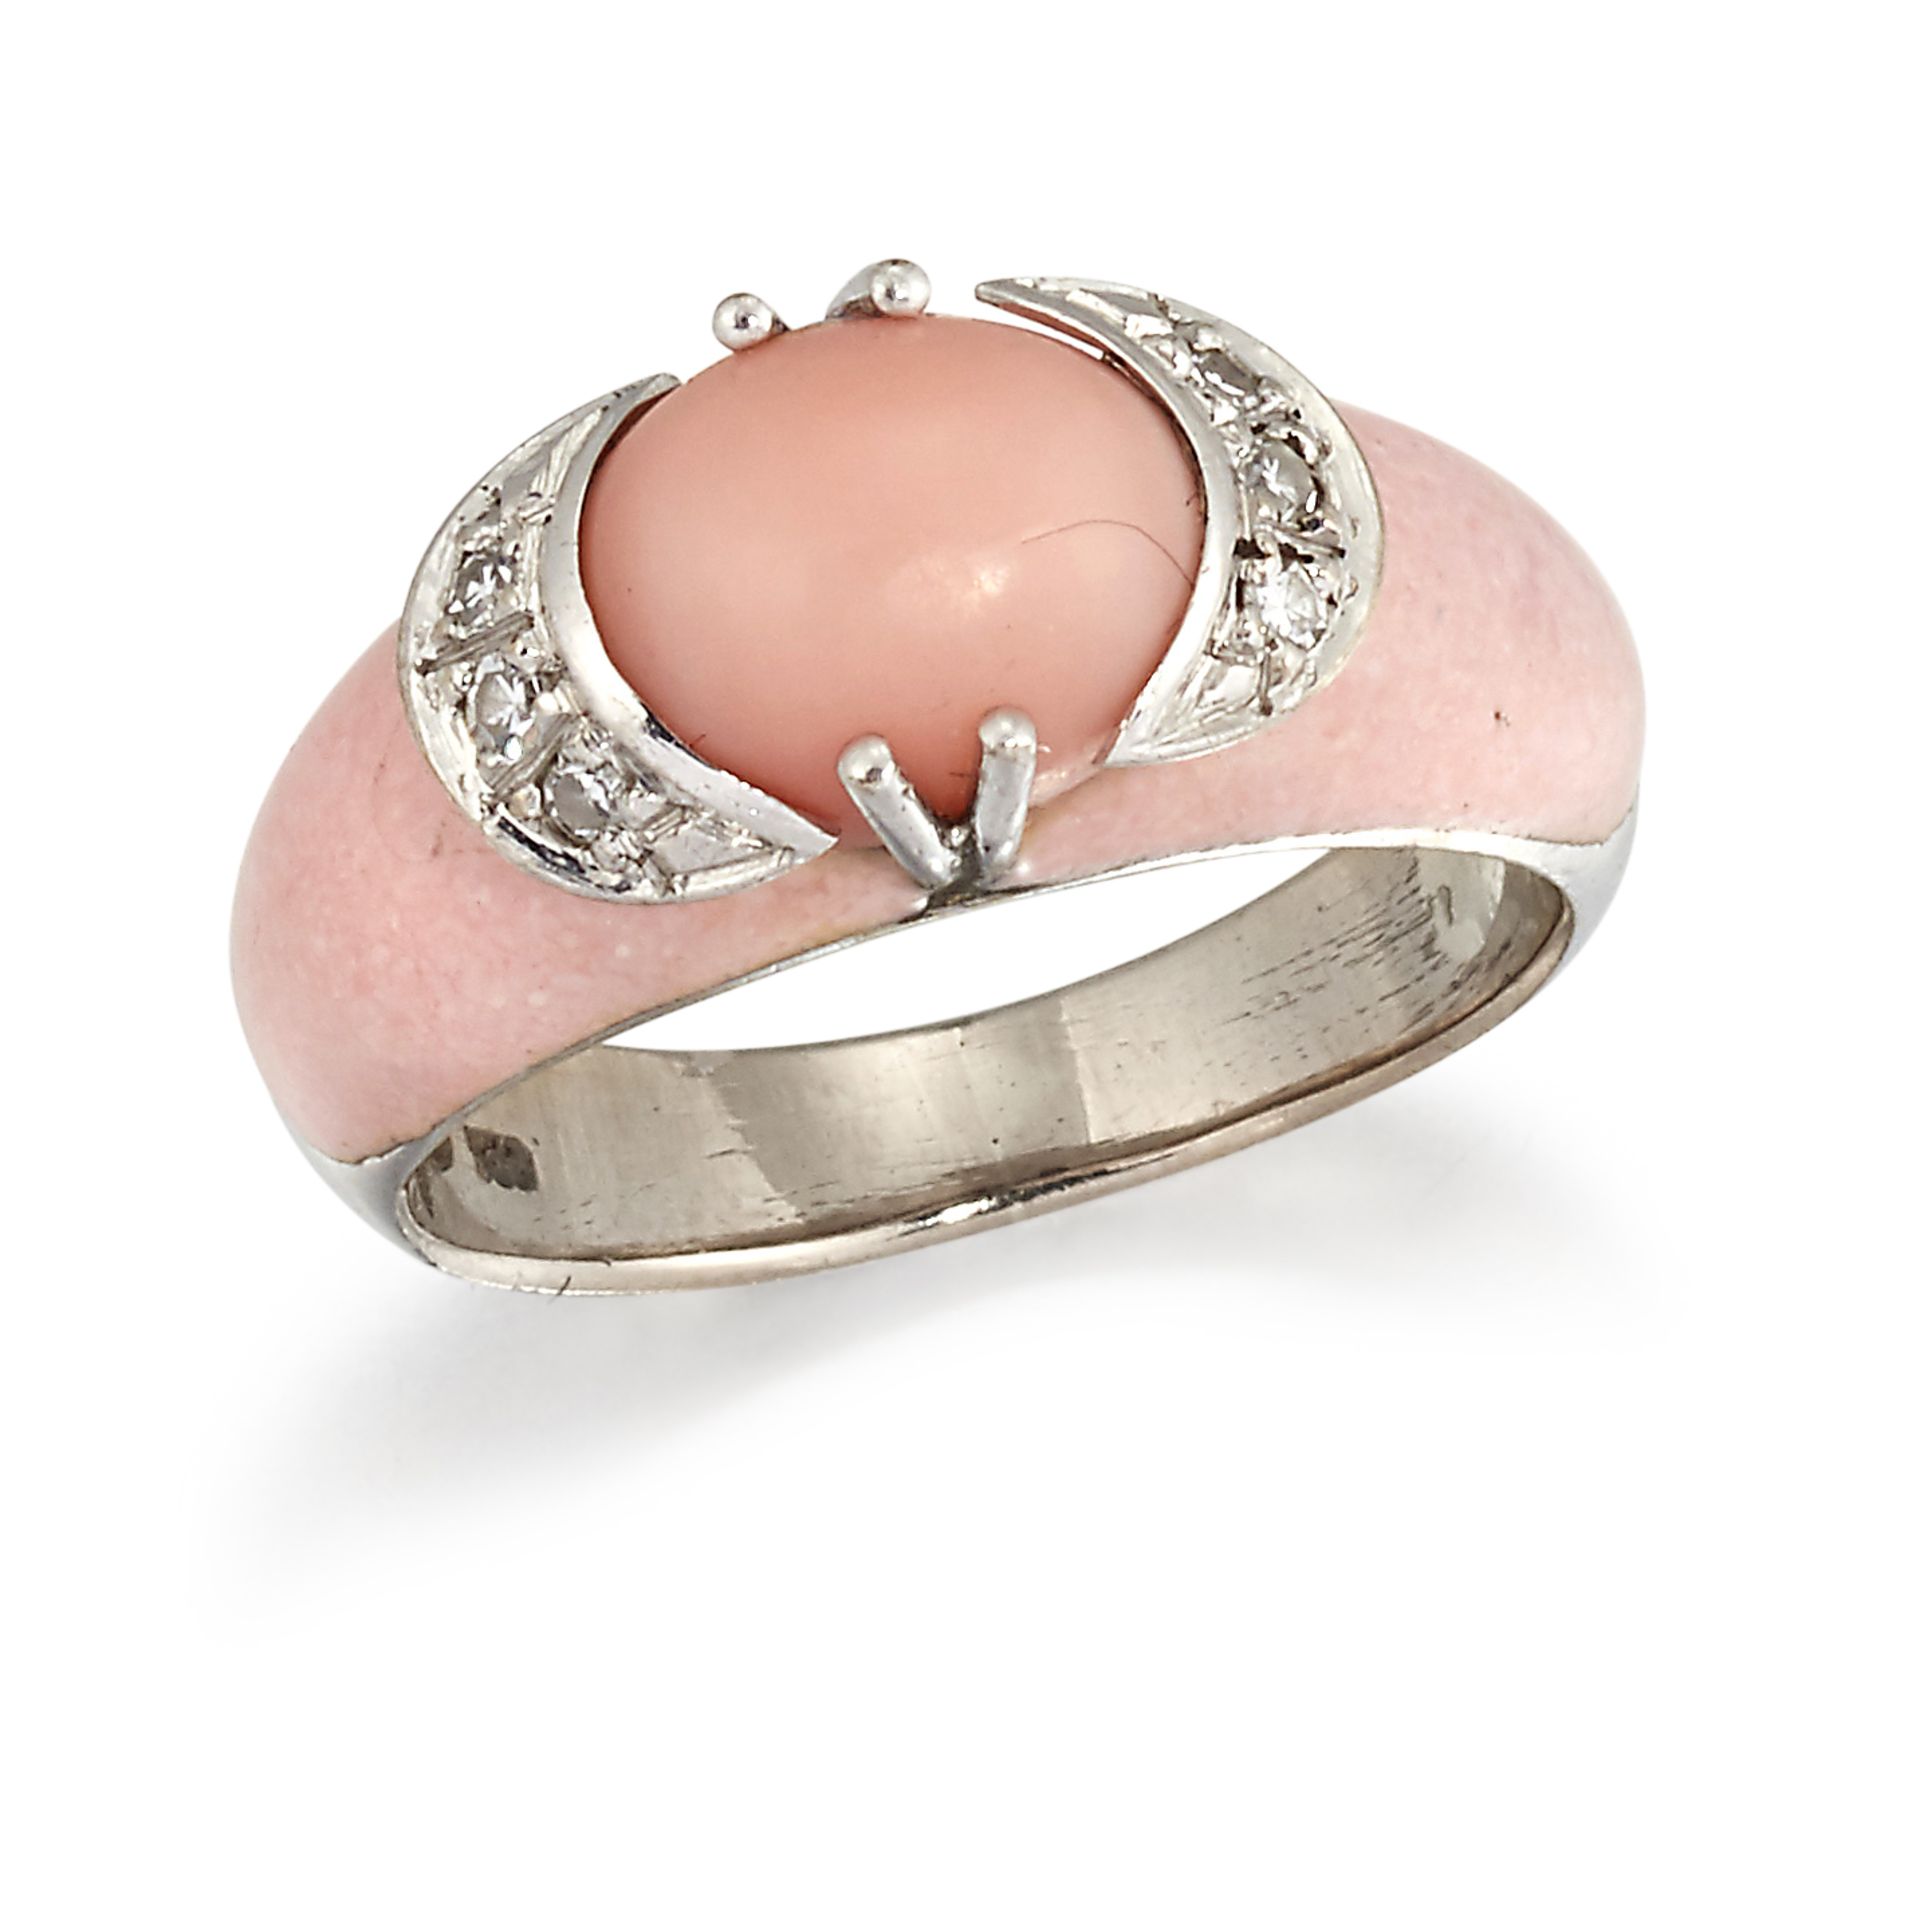 AN 18CT WHITE GOLD CORAL, DIAMOND AND ENAMEL RING